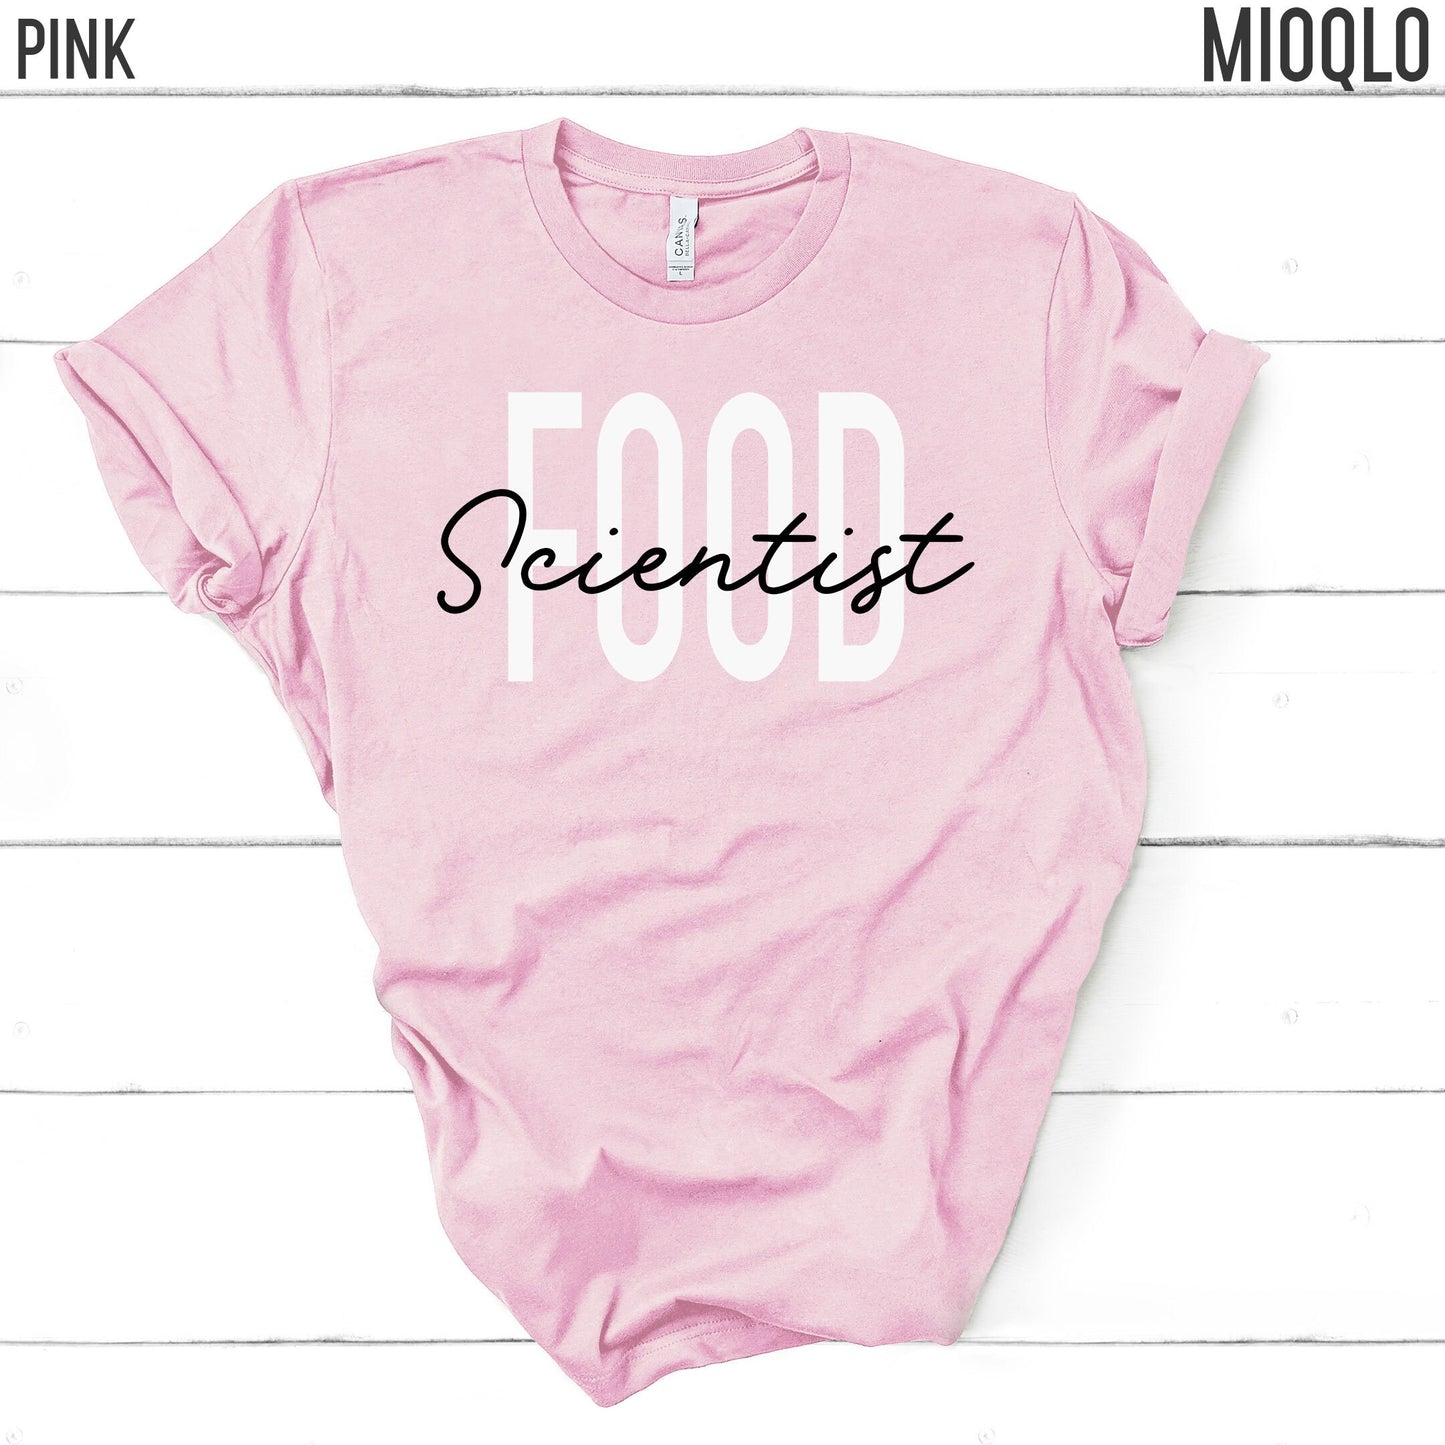 Food Scientist Shirt, Women In Science Major, Birthday Scientist Gift, Teacher Tee, New Scientist Gift, Graduation, Awesome Science Is Real